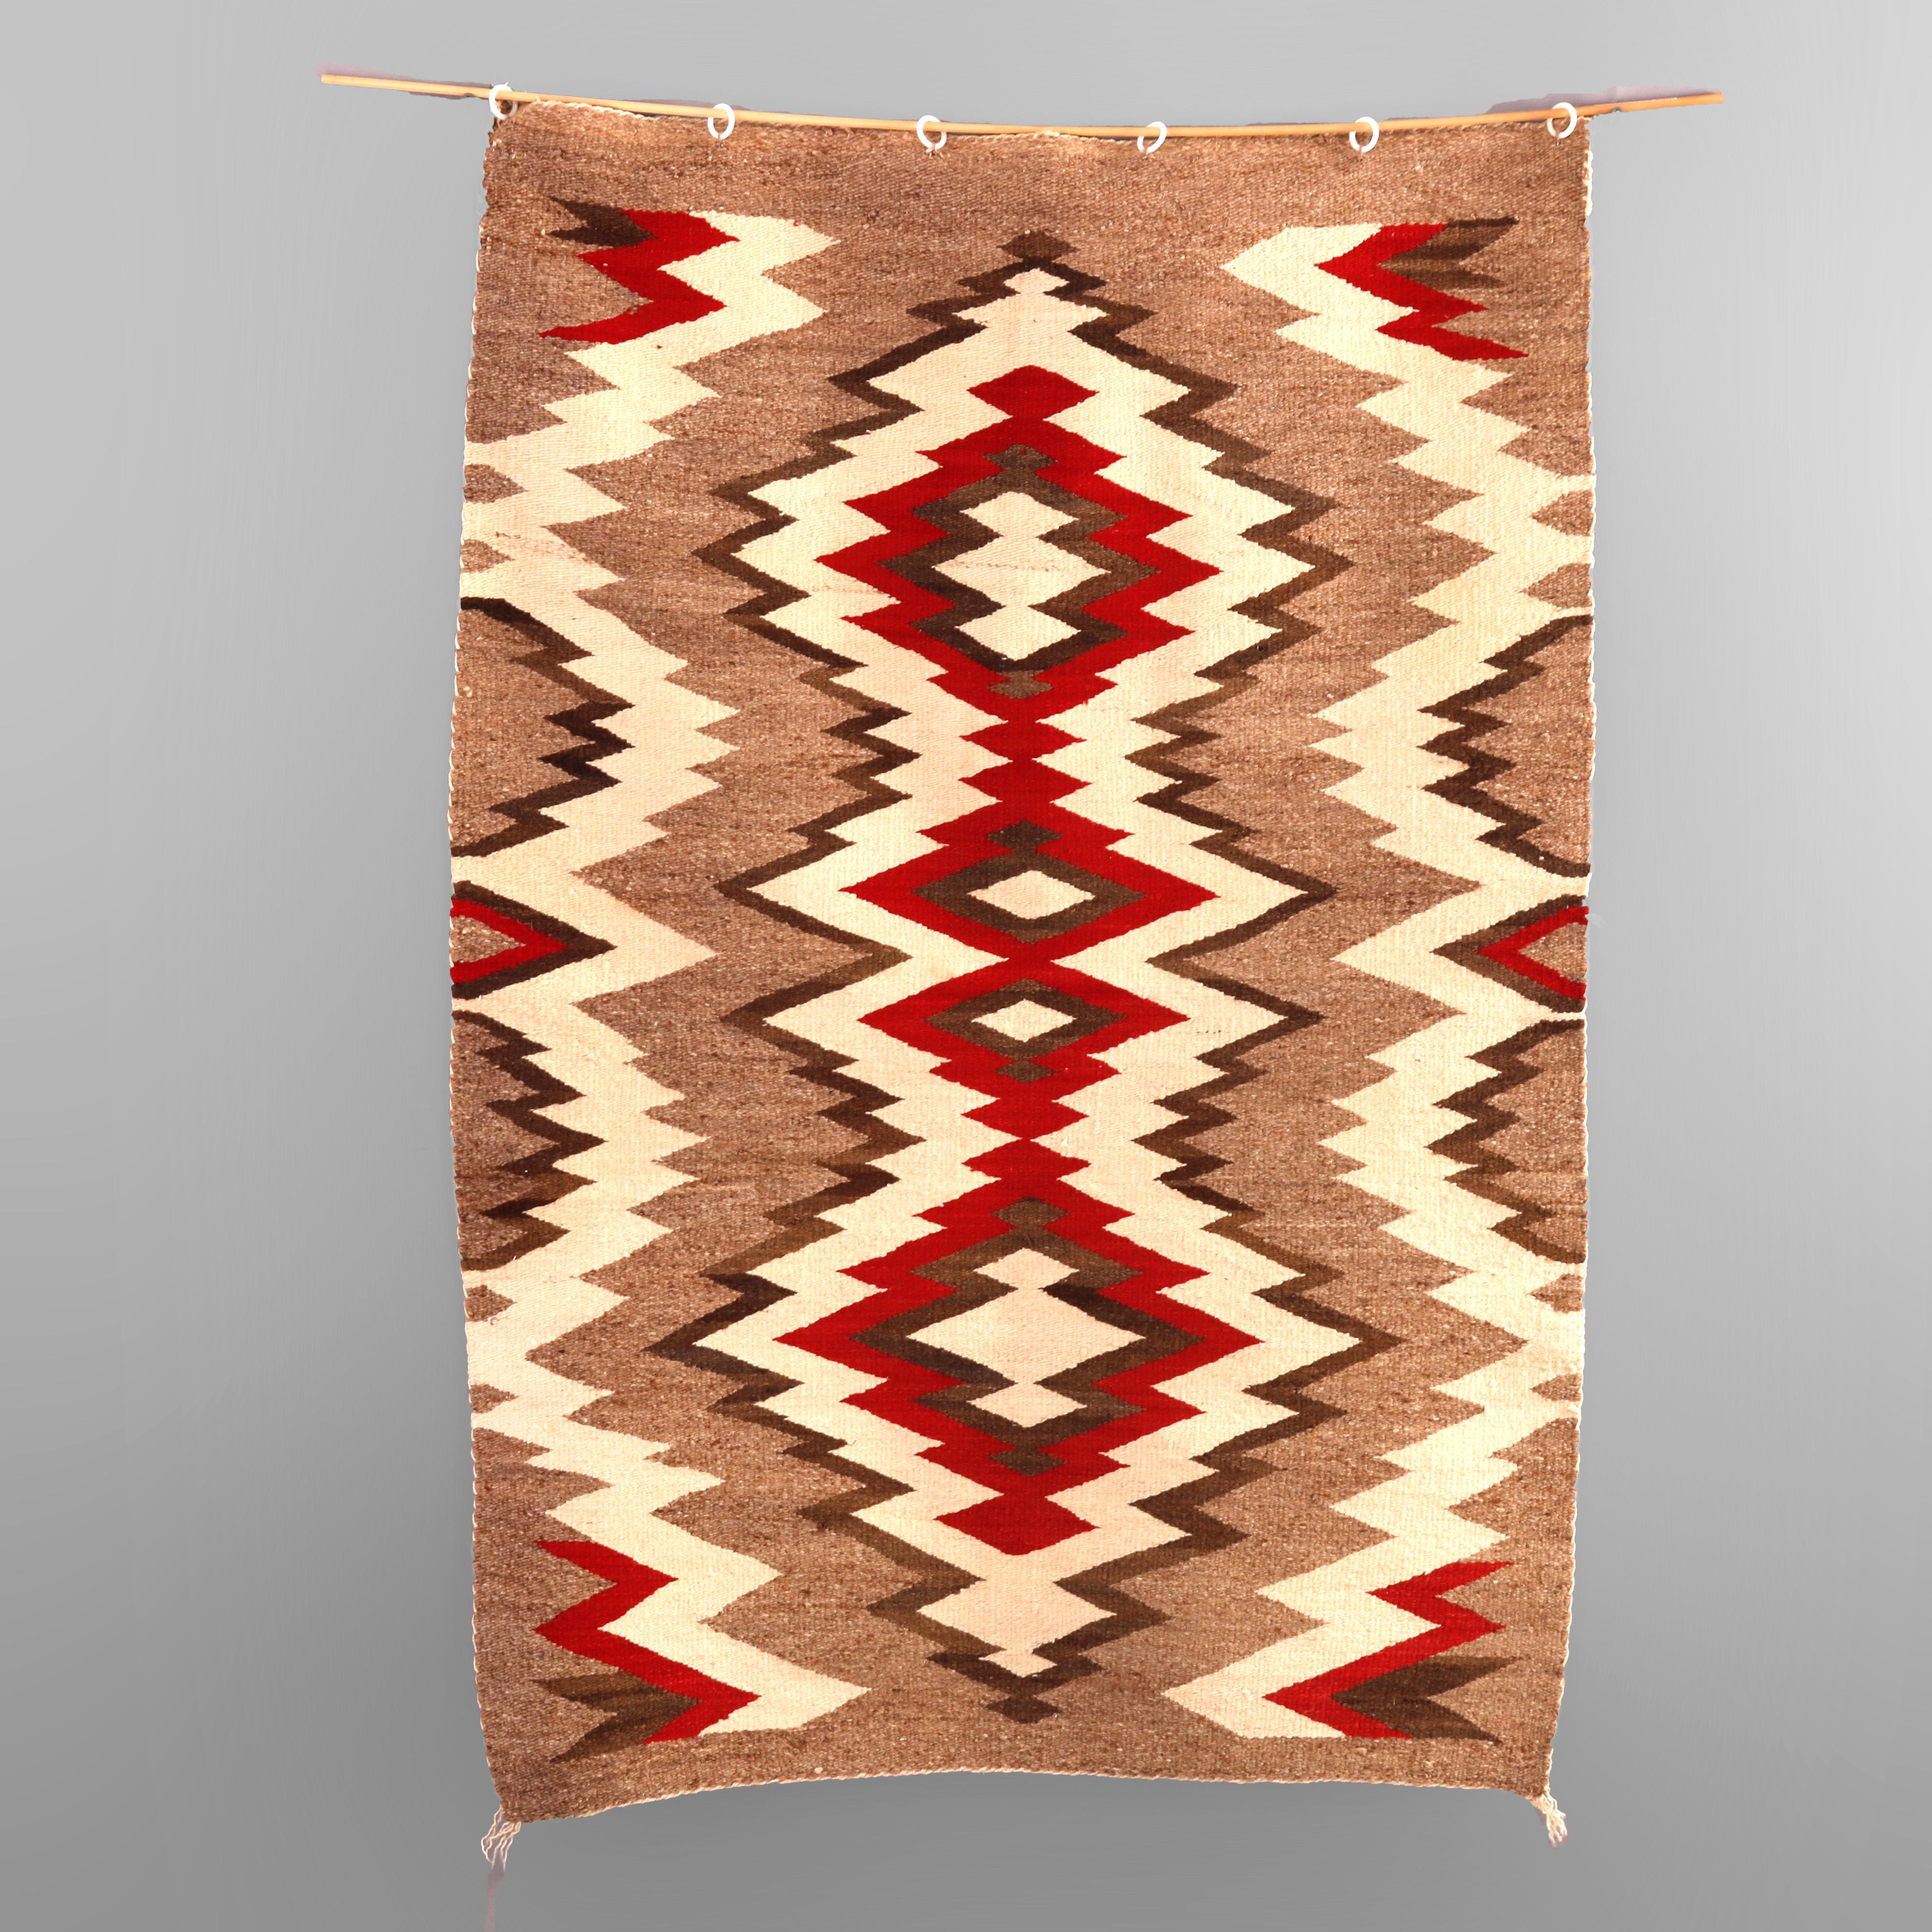 An antique Southwestern Native American Indian rug offers wool construction with a geometric eye dazzler pattern in red, black and white on brown ground, c1920

Measures - 47.5'' L x 32'' W x .25'' D.